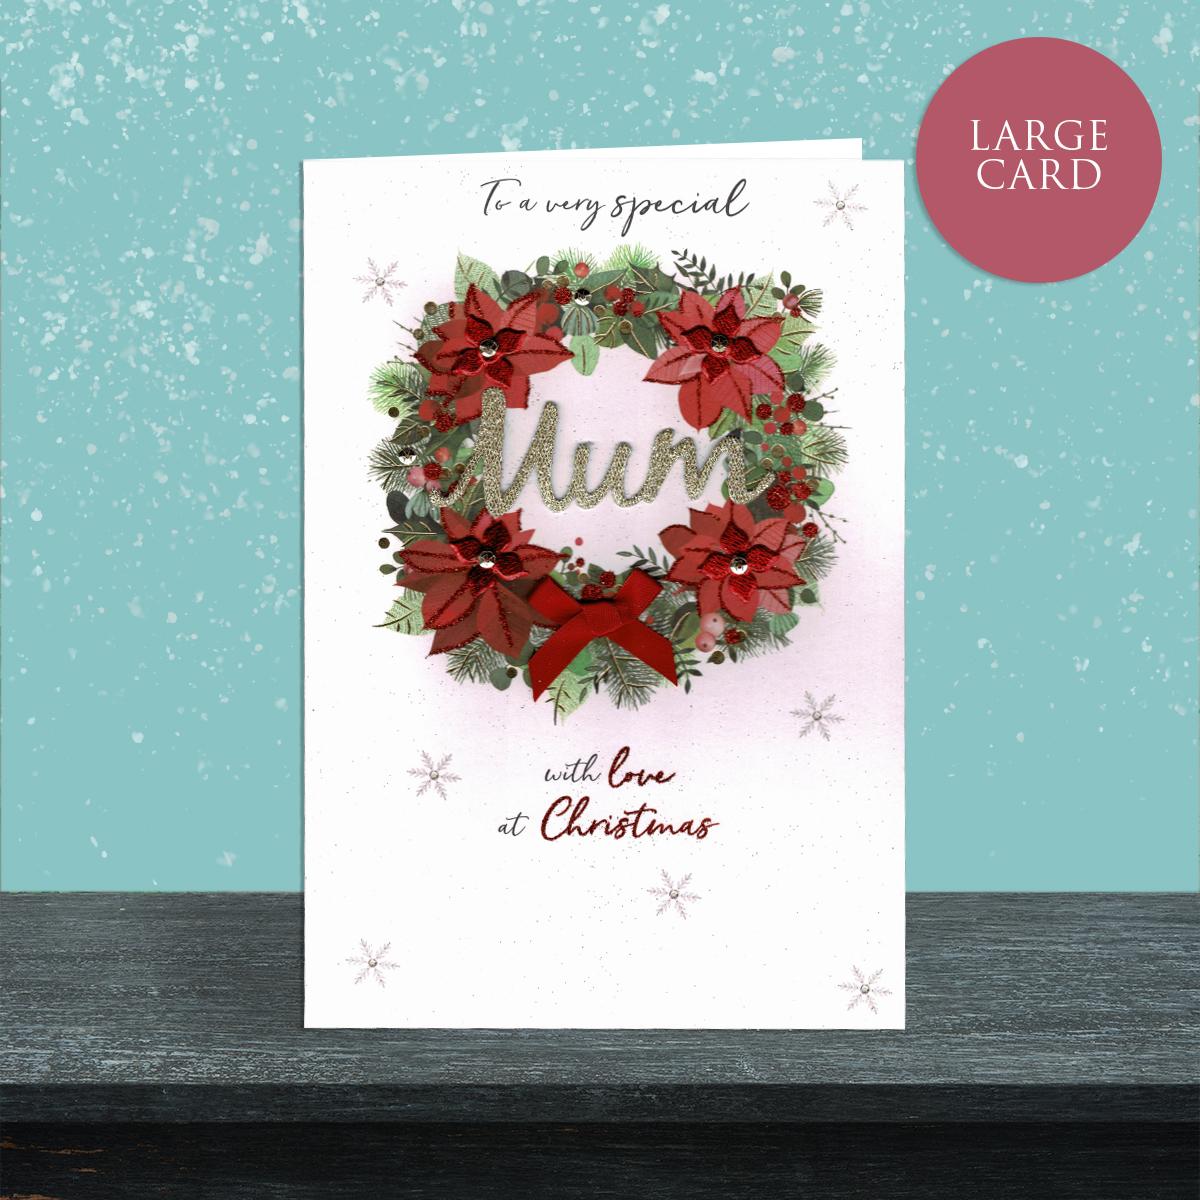 To A Very Special Mum Christmas Card Showing A Beautiful Handcrafted Door Garland . Embellished With Ribbon, Decoupage And Gem Enhancements. Finished With A Silver Envelope